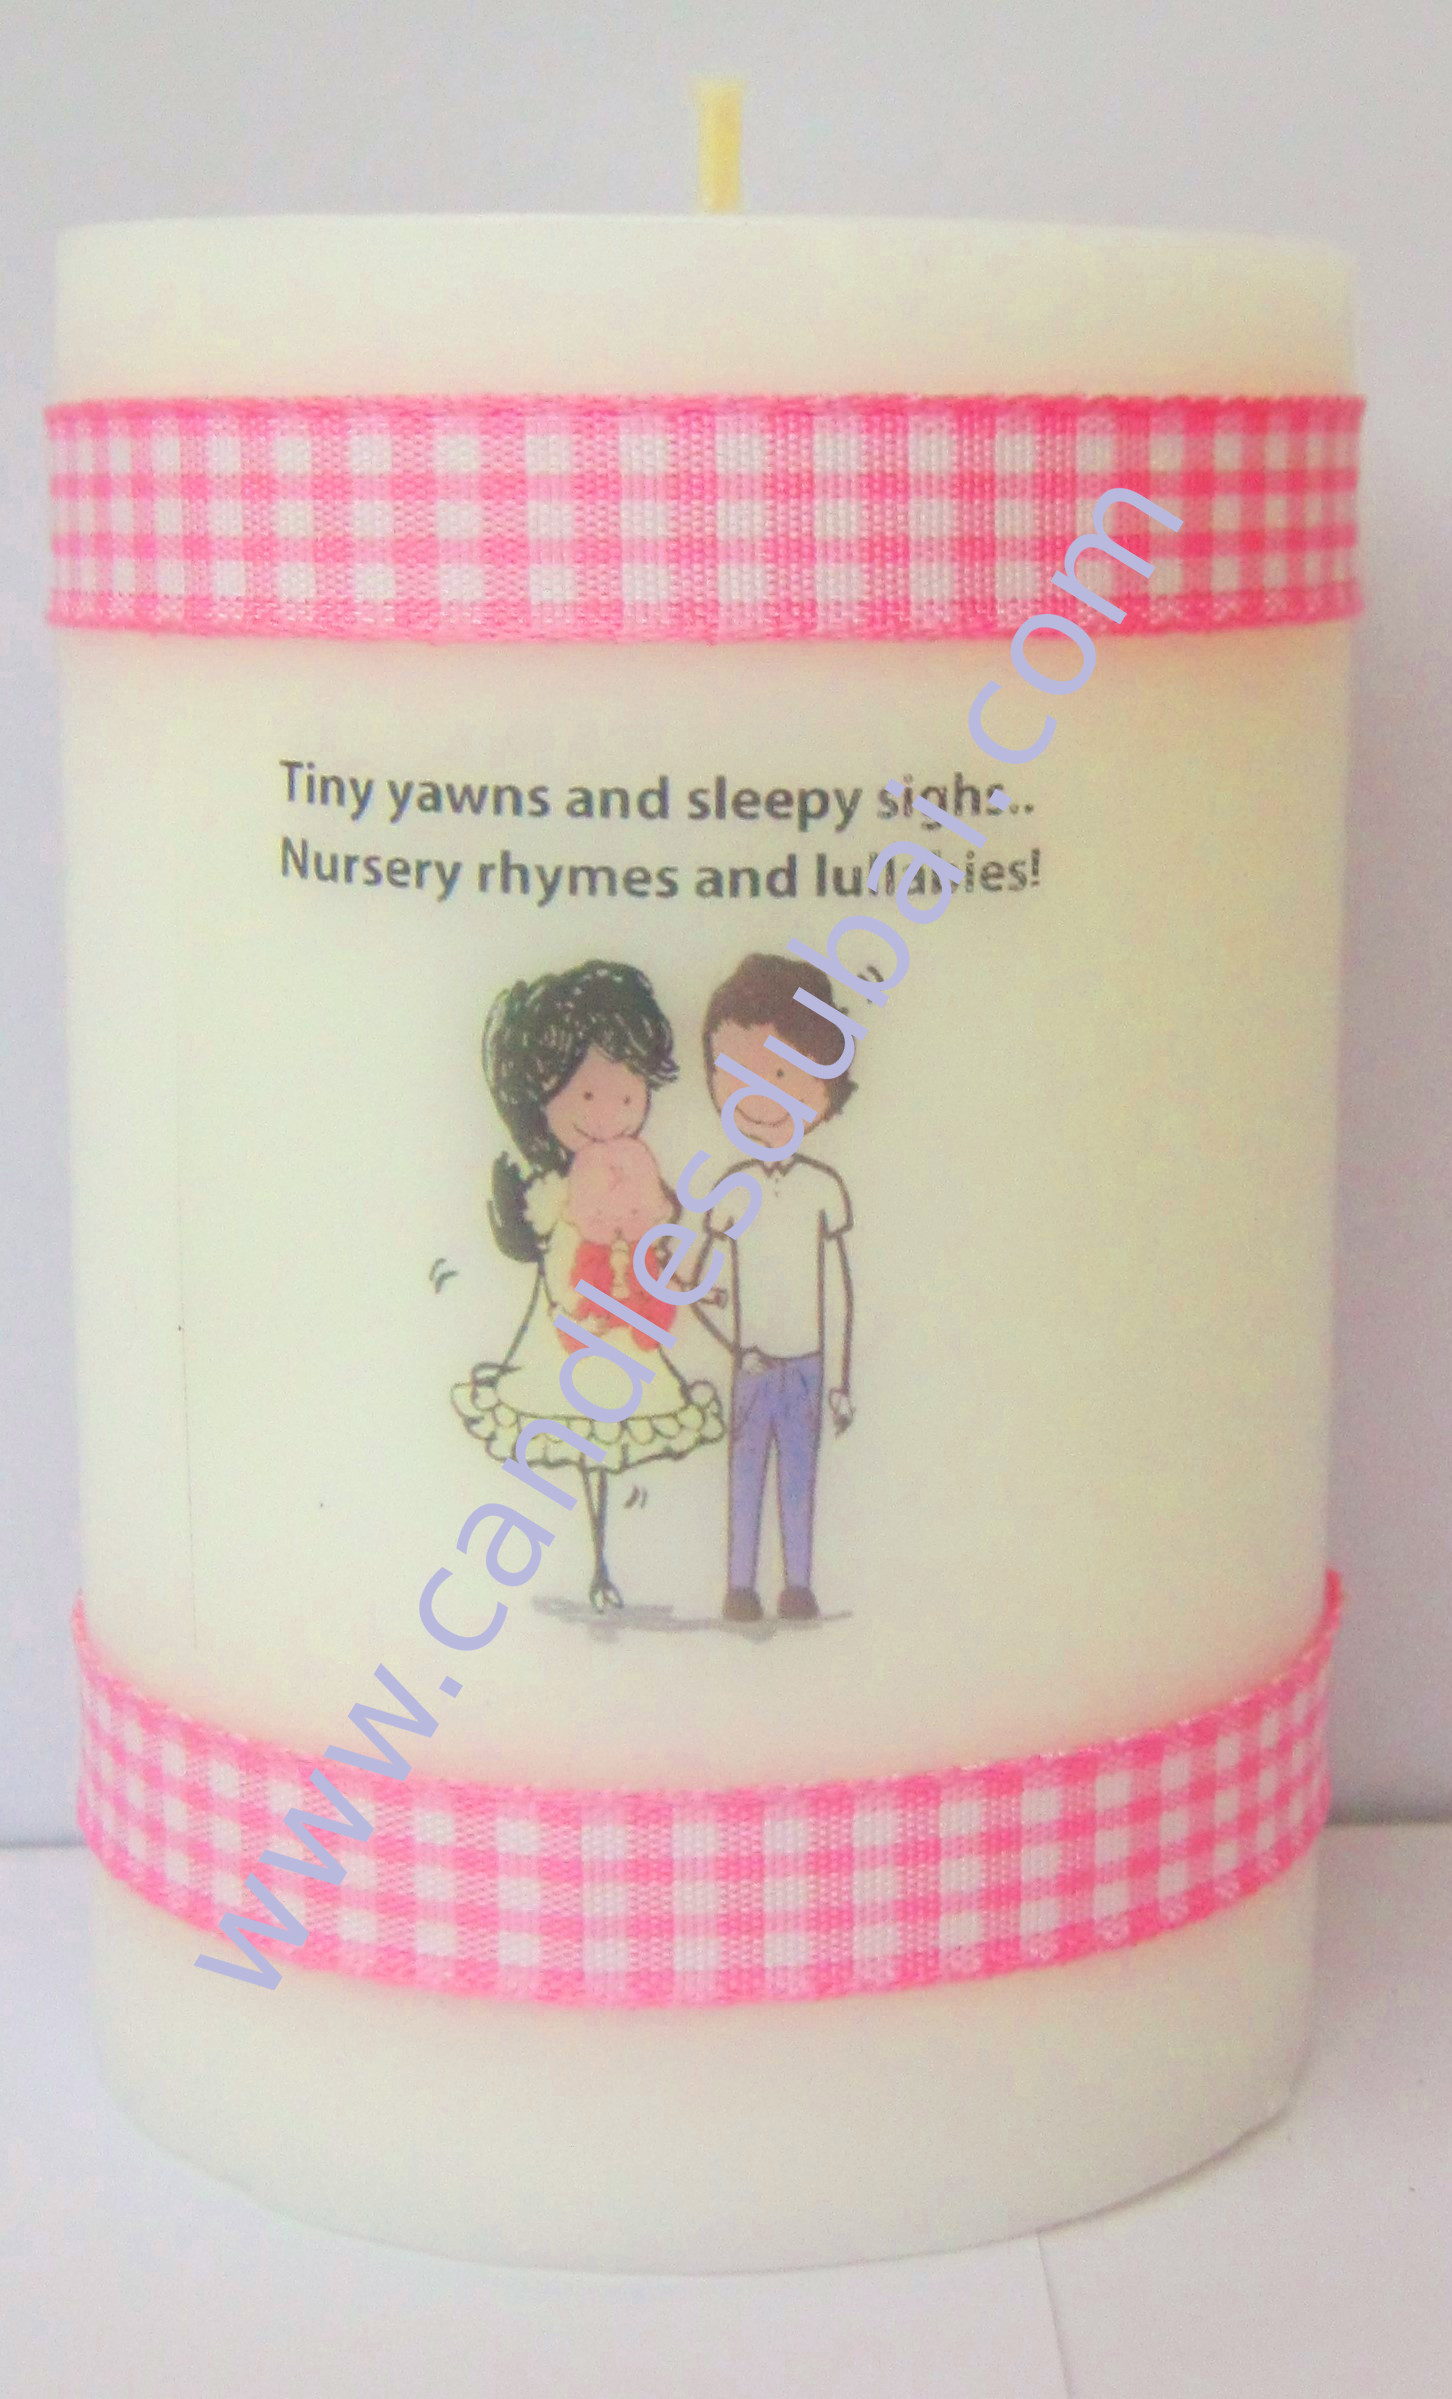 personalised candles